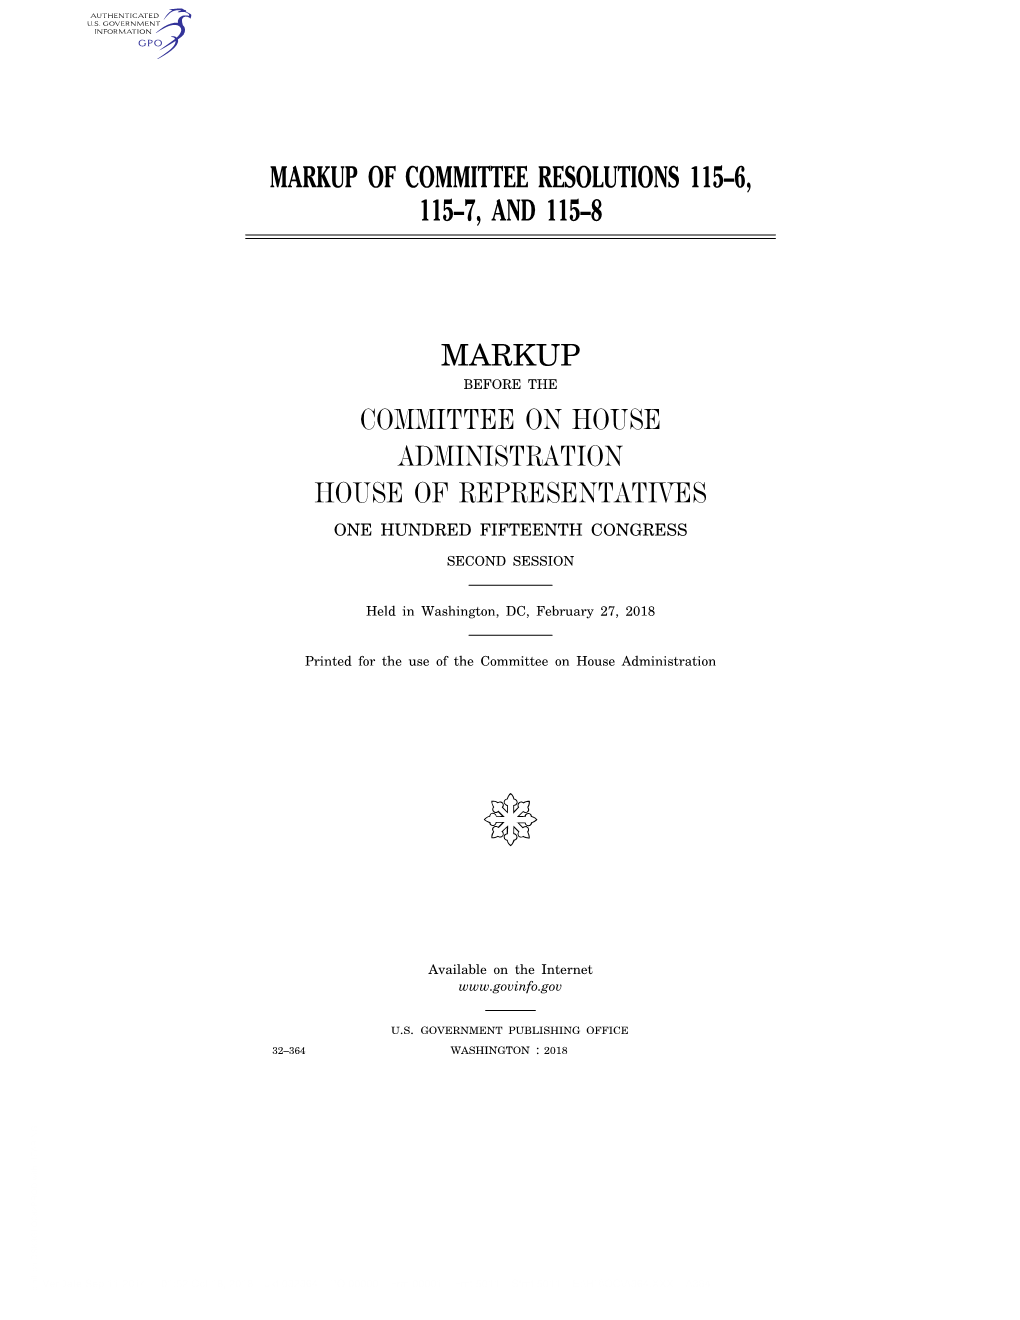 Markup of Committee Resolutions 115–6, 115–7, and 115–8